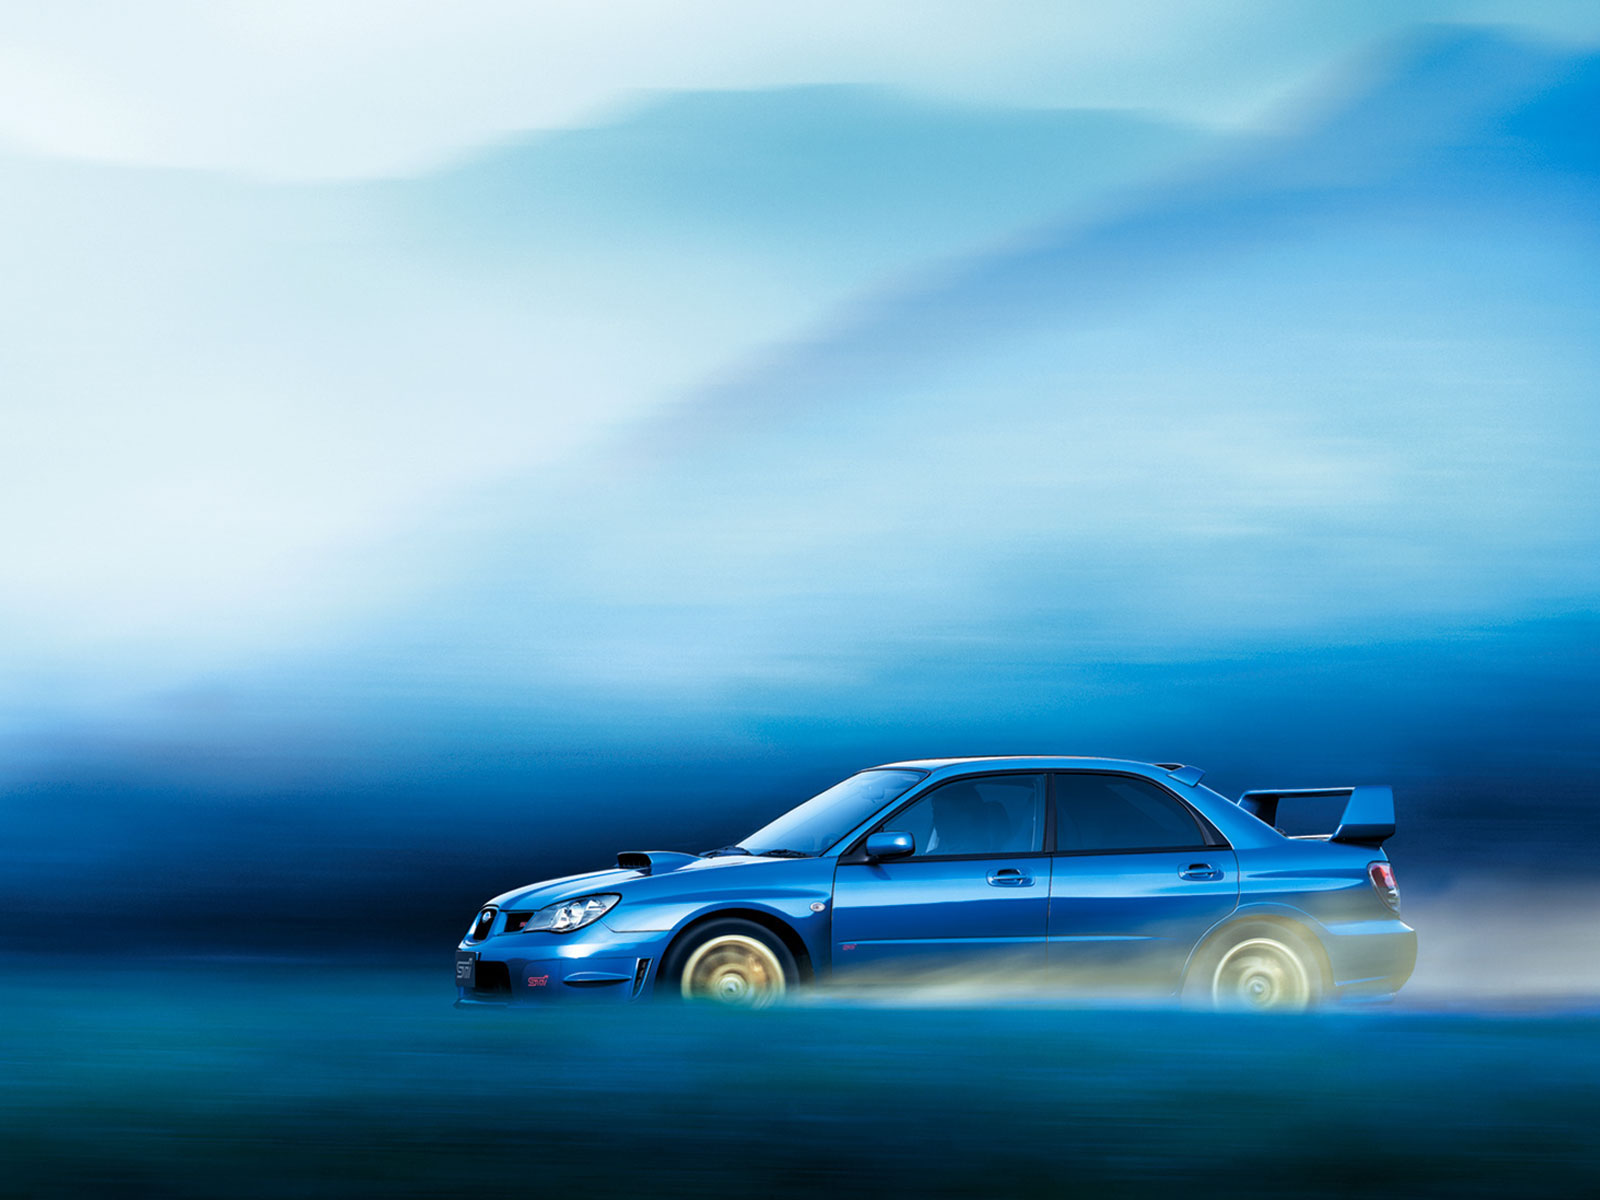 Subaru template Backgrounds powerpoint backgrounds